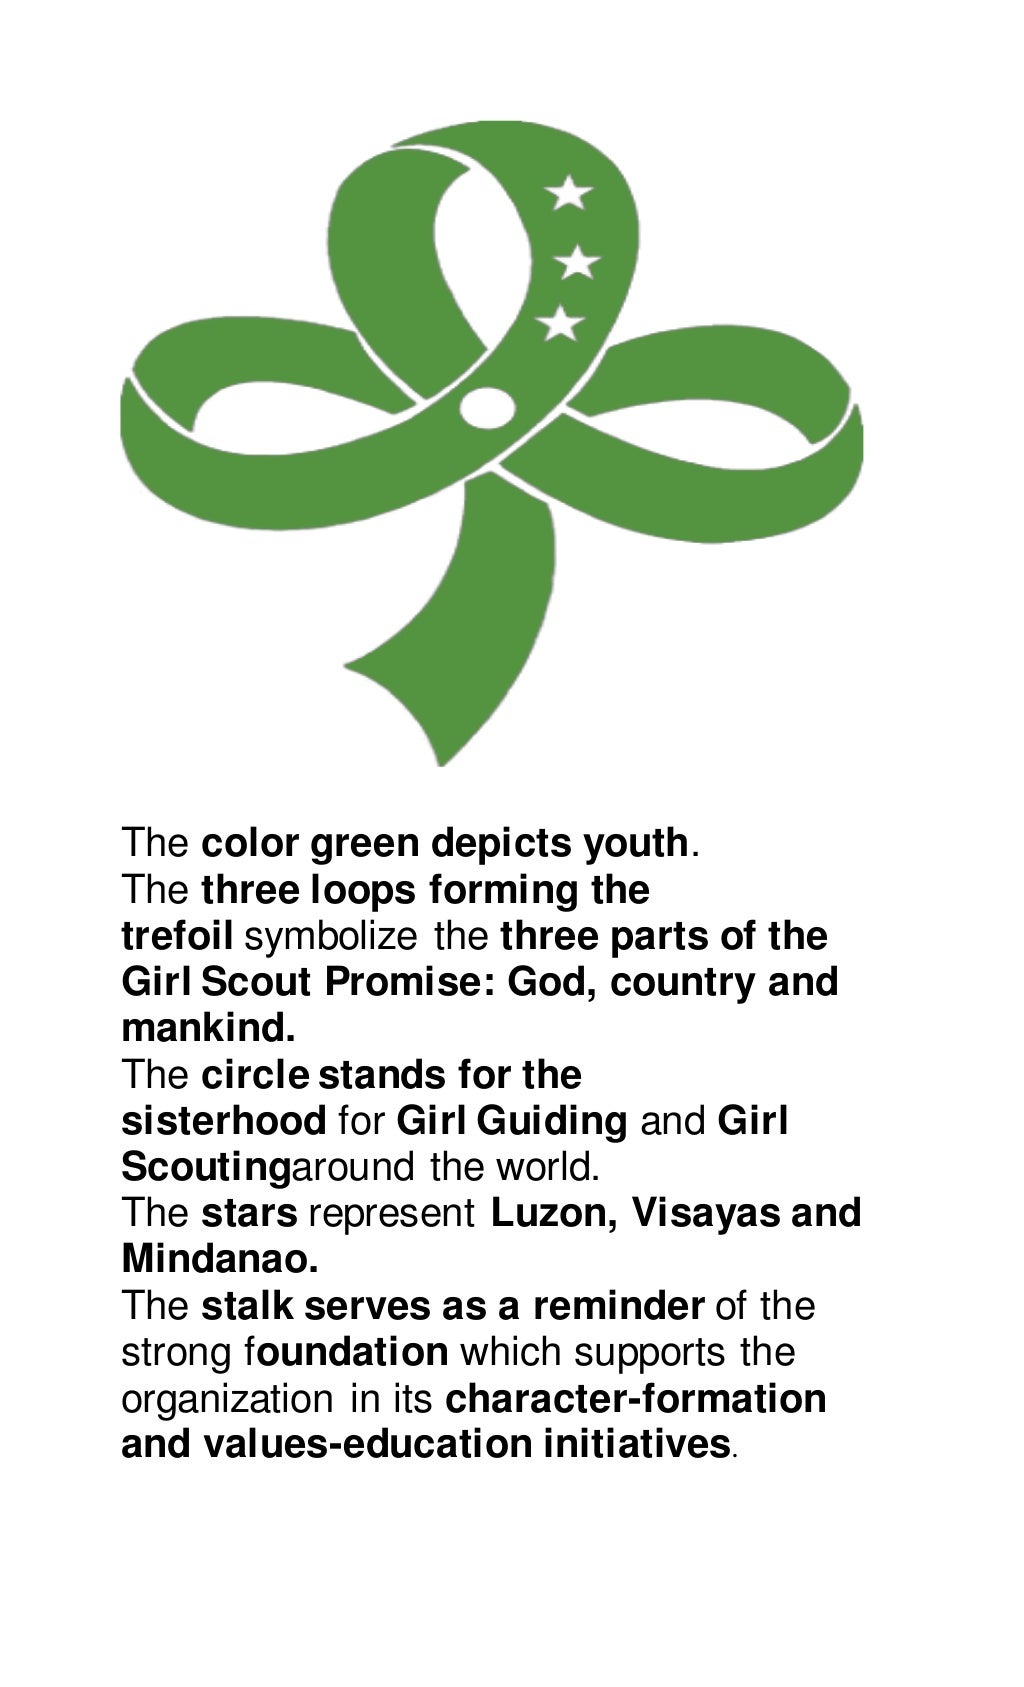 the-girl-scout-promise-and-the-girl-scout-law